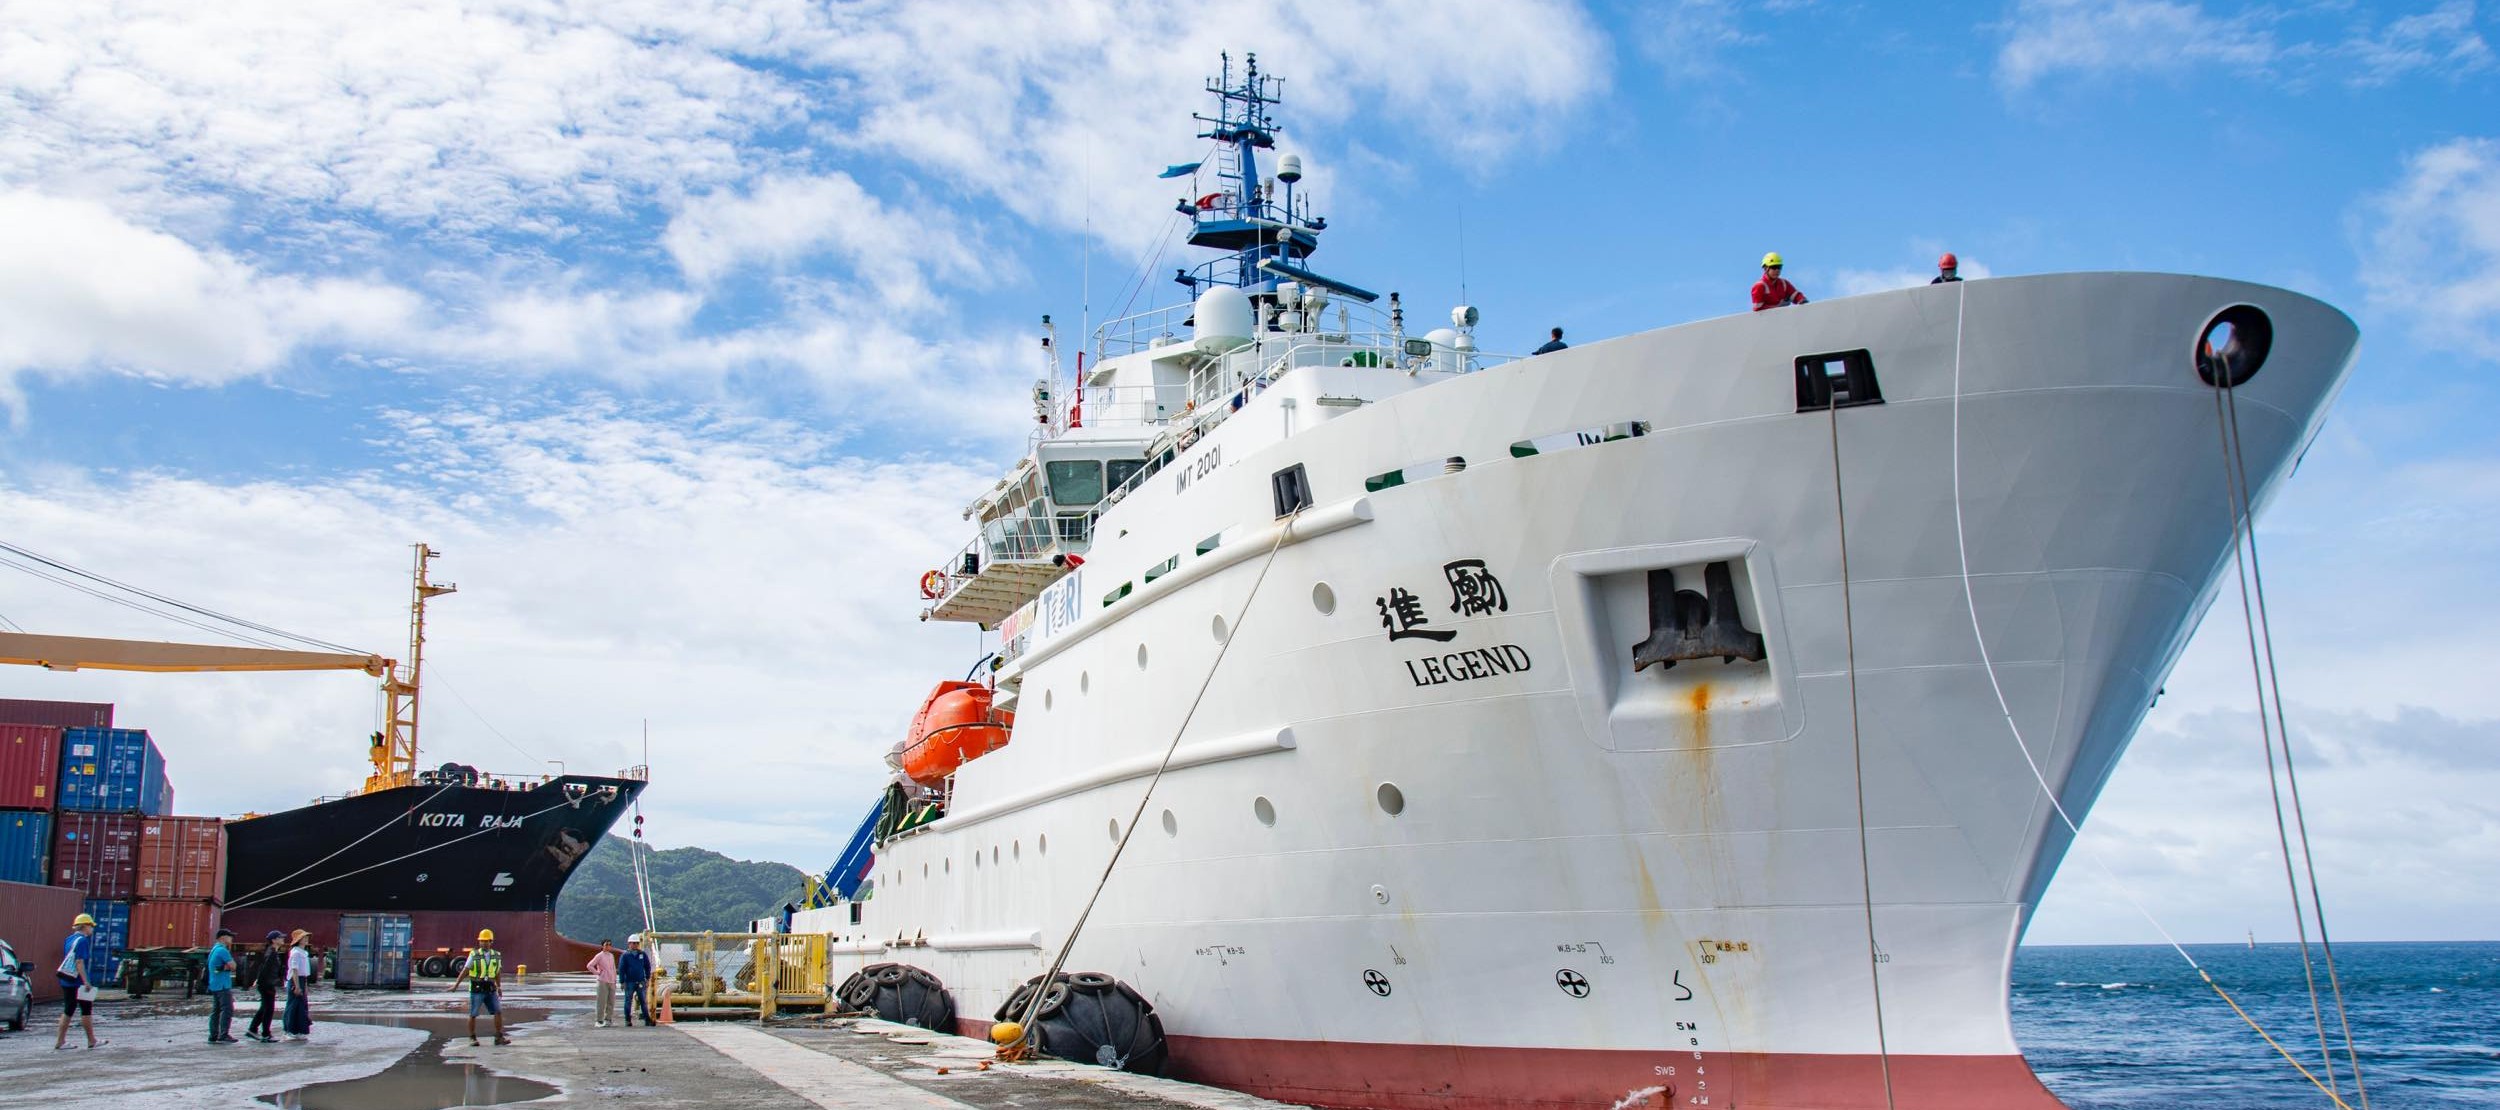 PICRC Research Assistant, MQ Mesengei, joins Taiwan’s Research Vessel “the Legend” on a 2-week research cruise